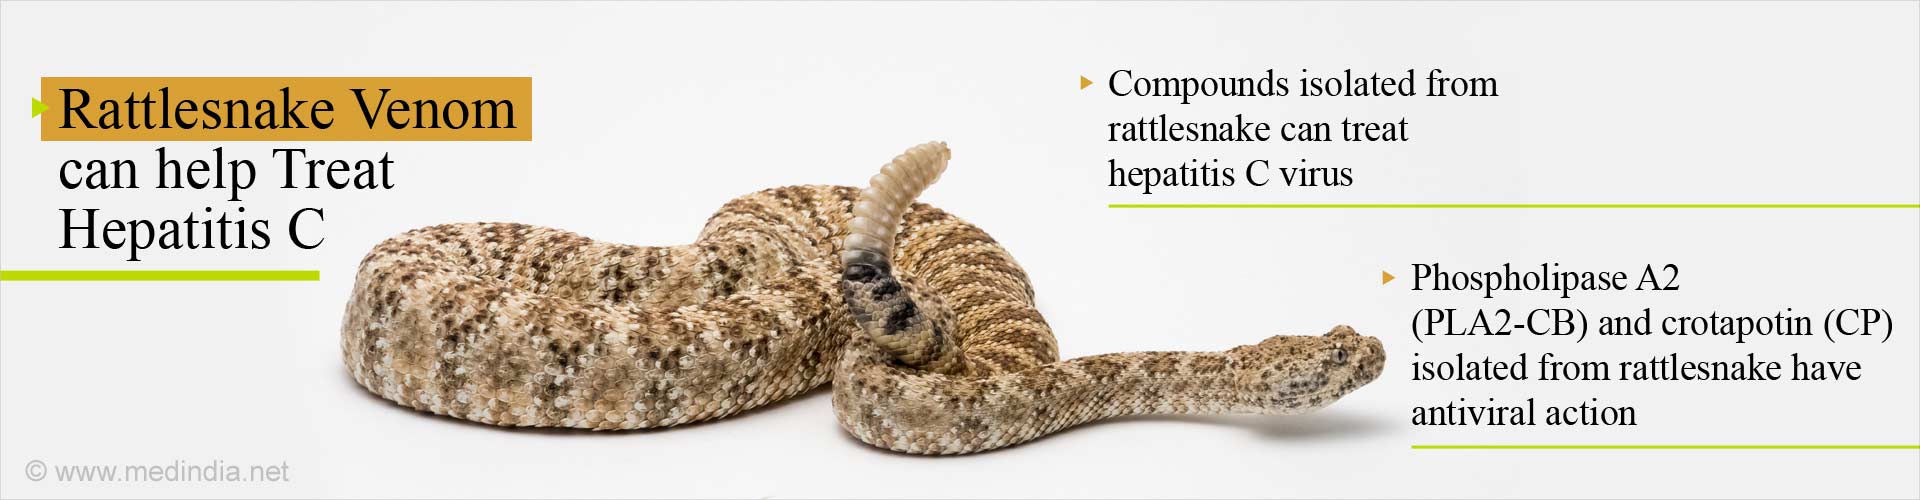 Treat Hepatitis C With Compounds from Rattlesnake Venom